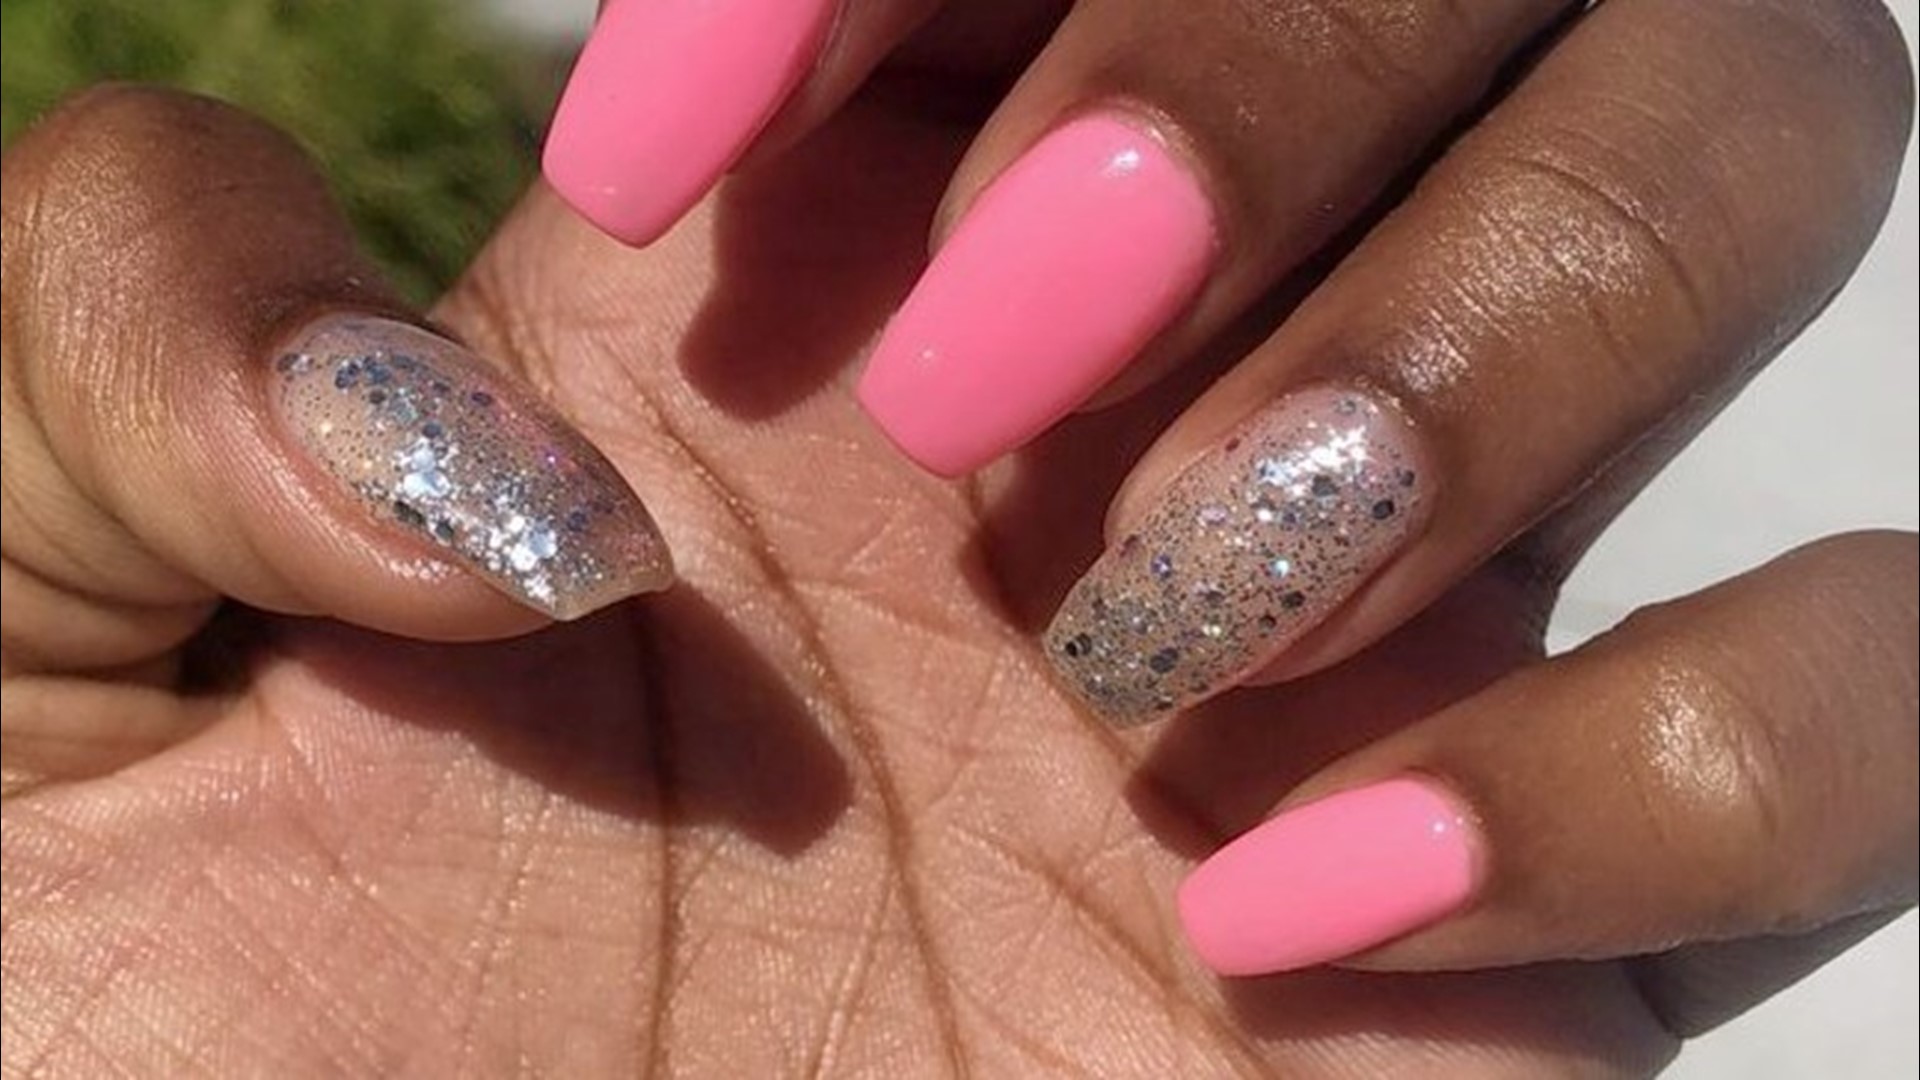 20 of the Best Places to Get Your Nails Done in New Hampshire